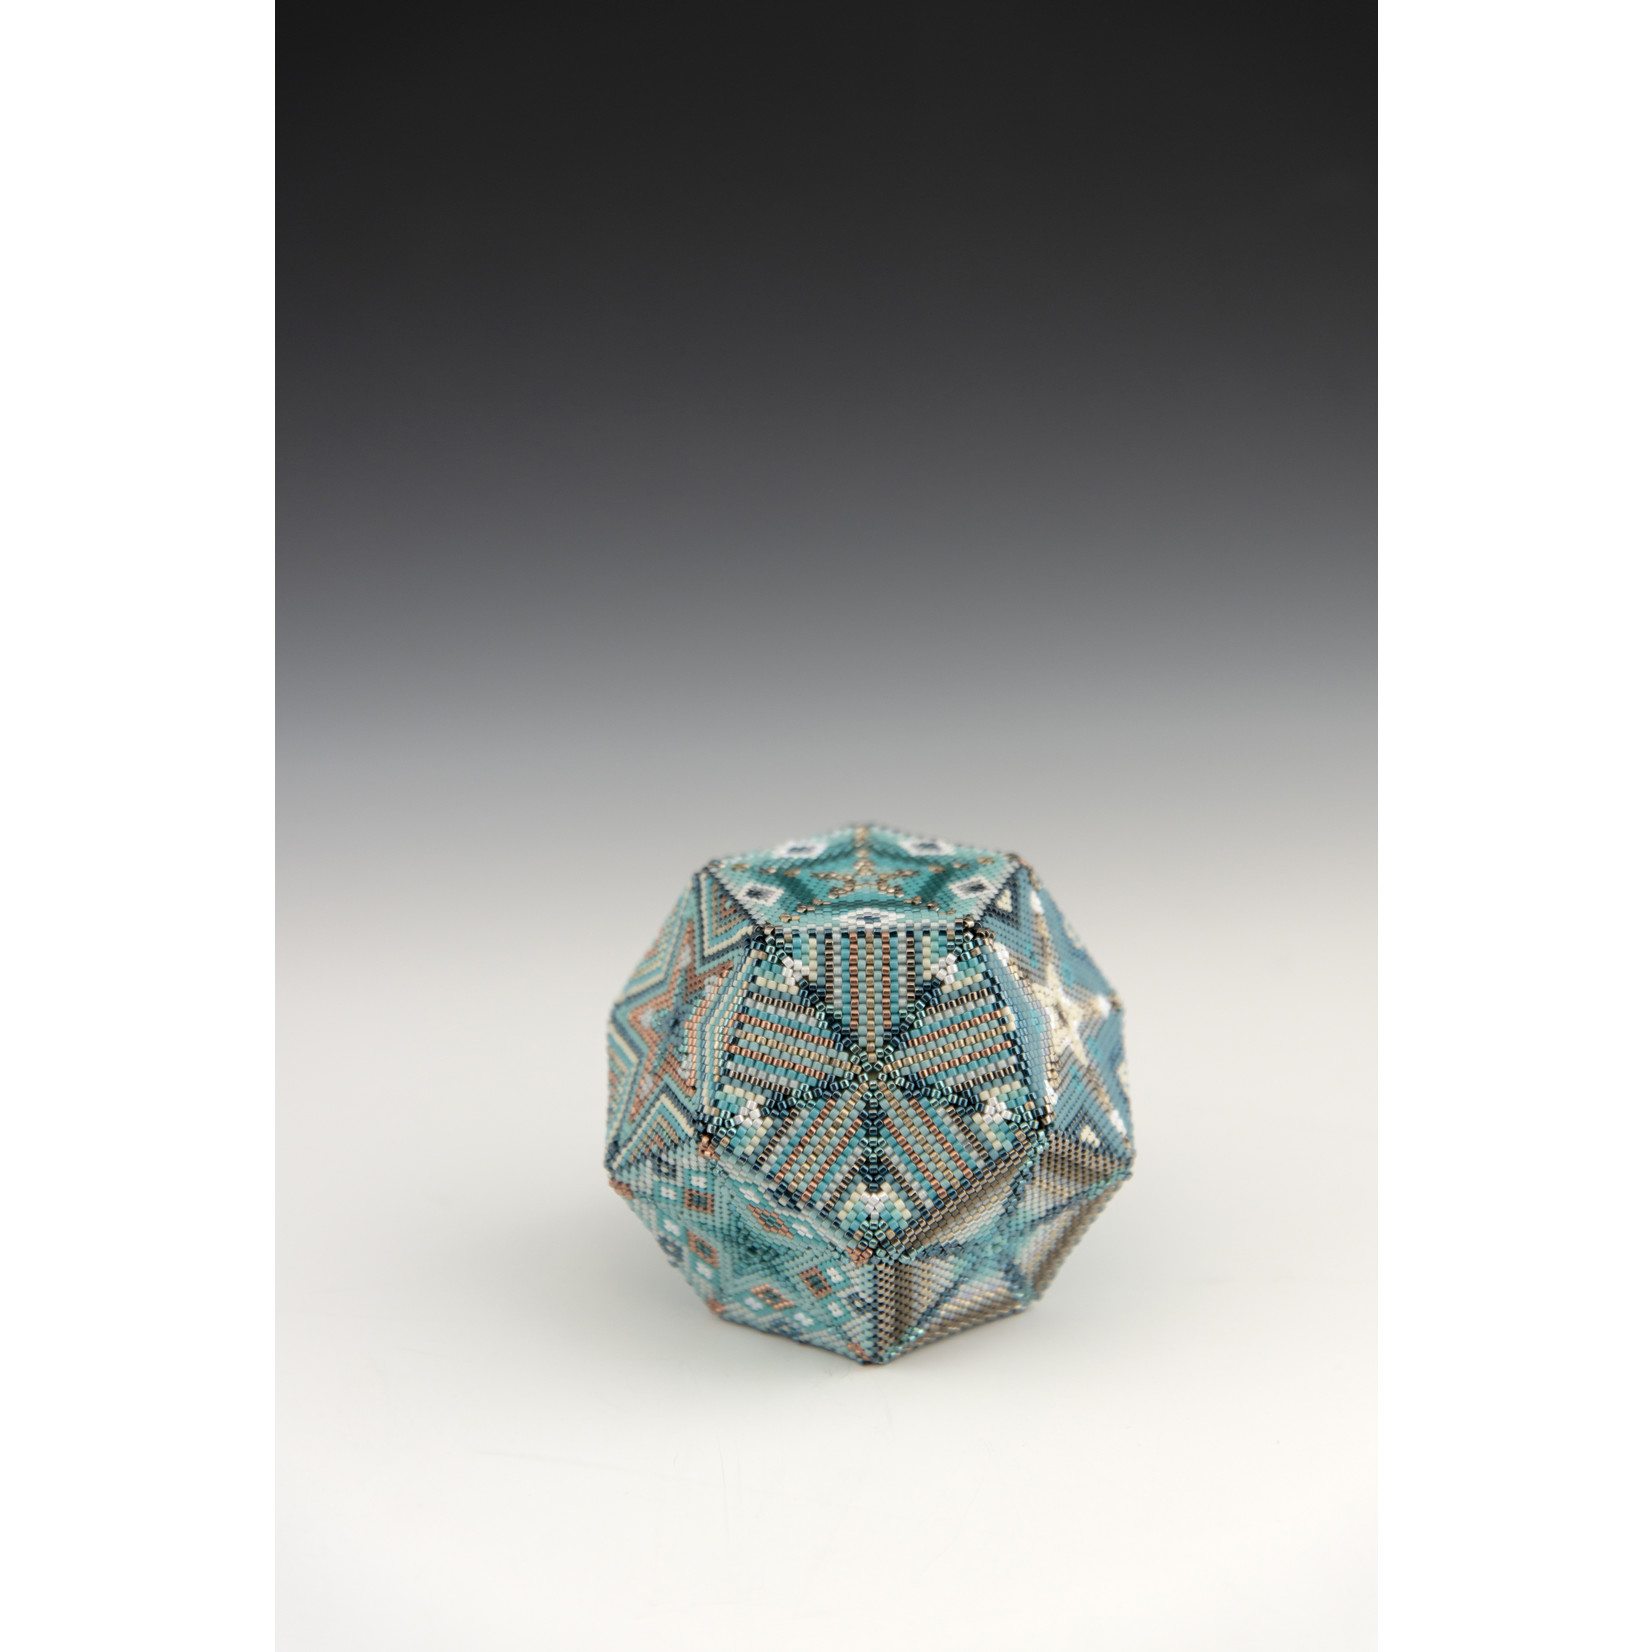 Stirling Studios Beaded Dodecahedron - 12 sided geometric solid